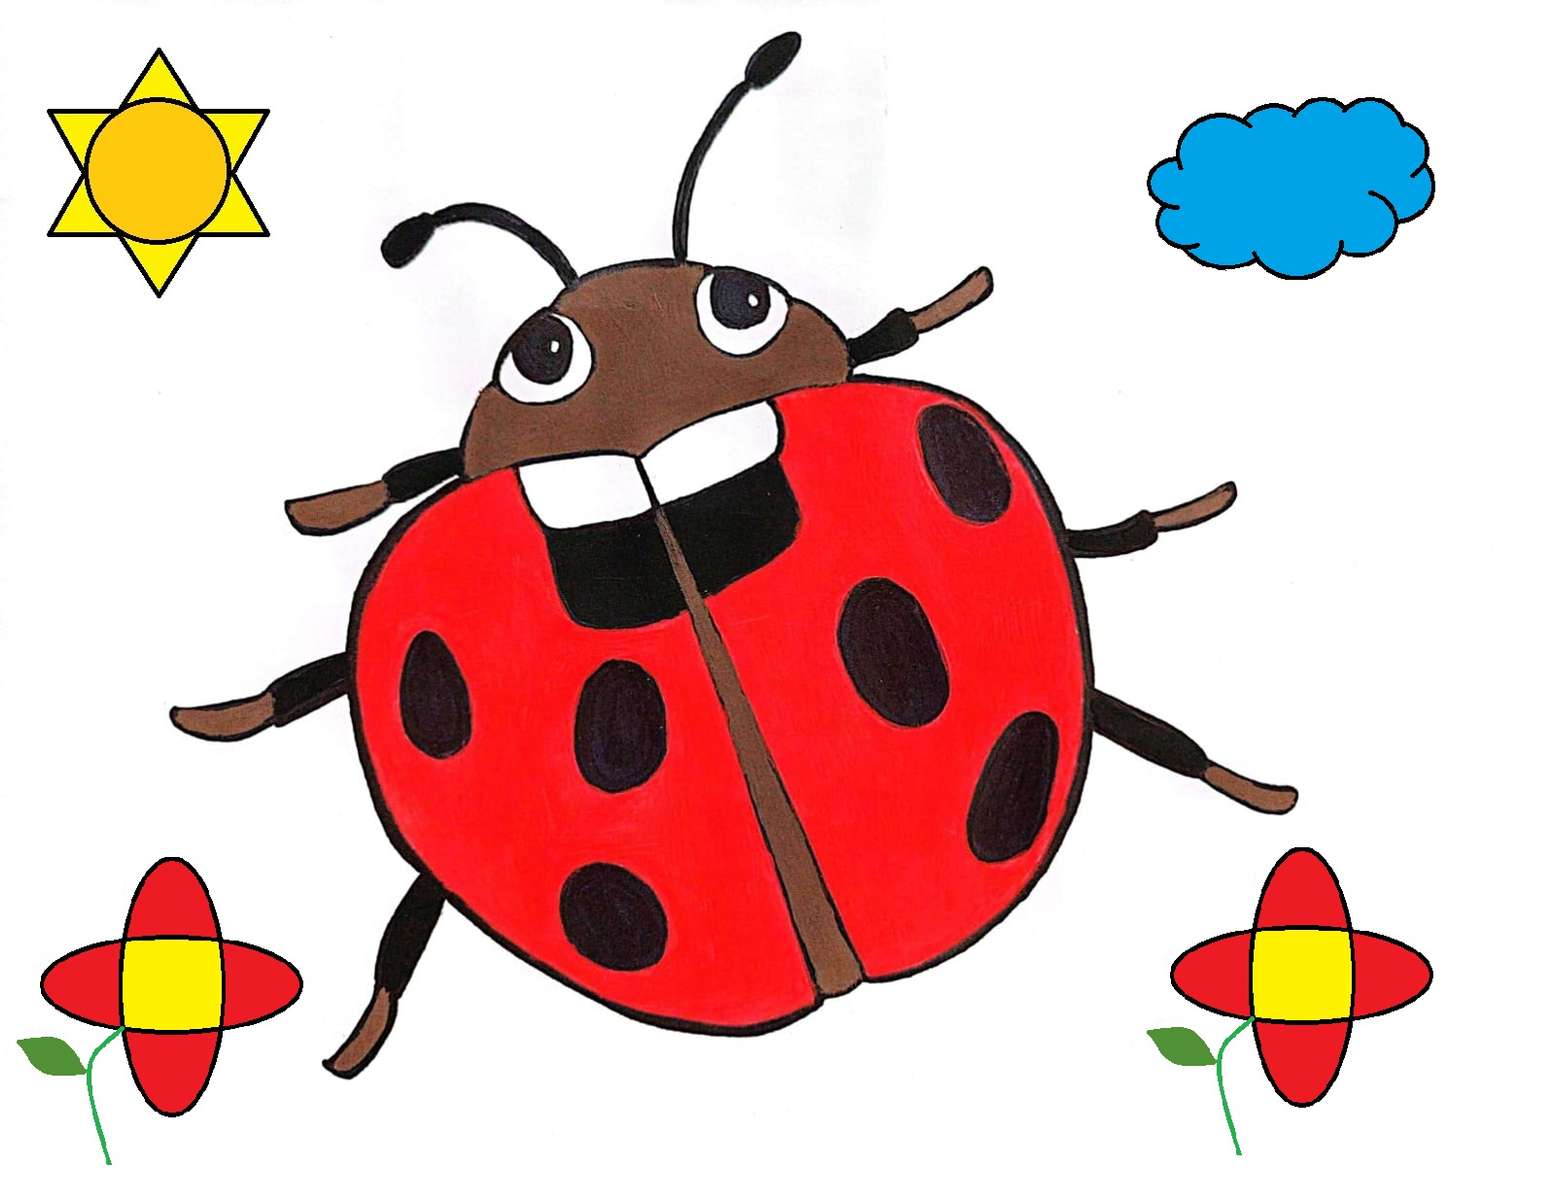 Insect - Ladybug online puzzle